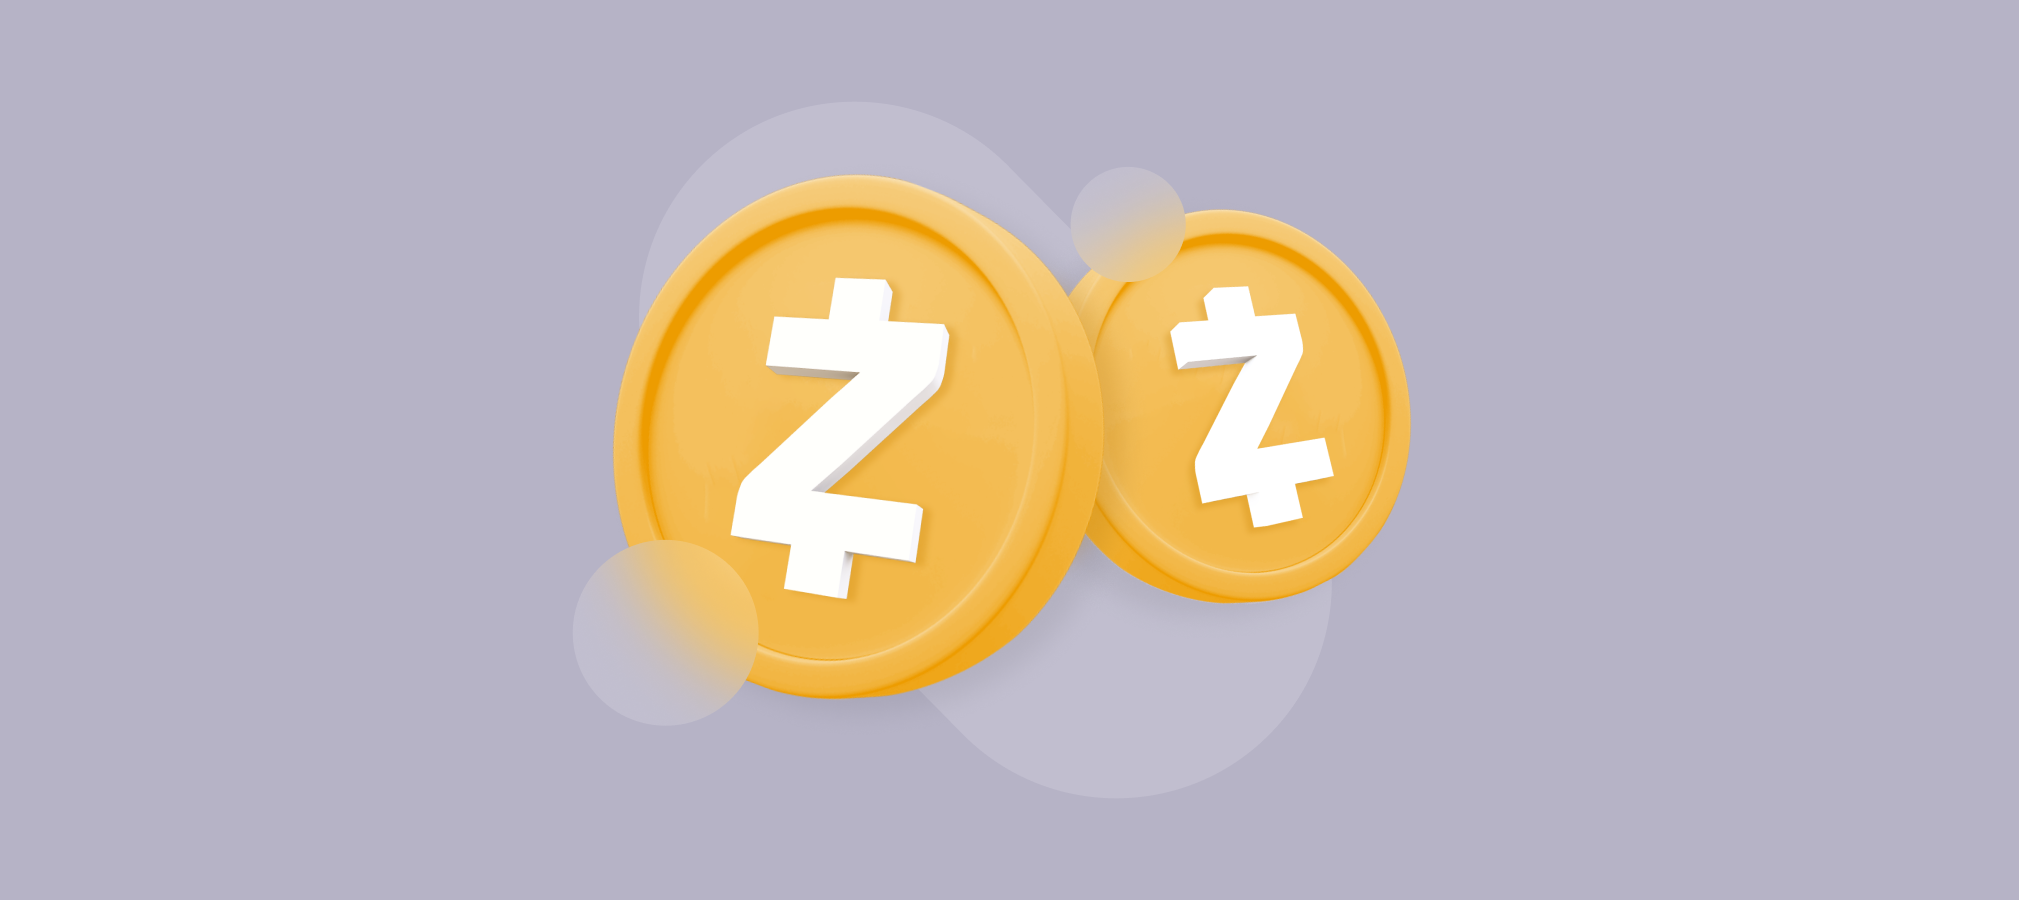 What Is Zcash?